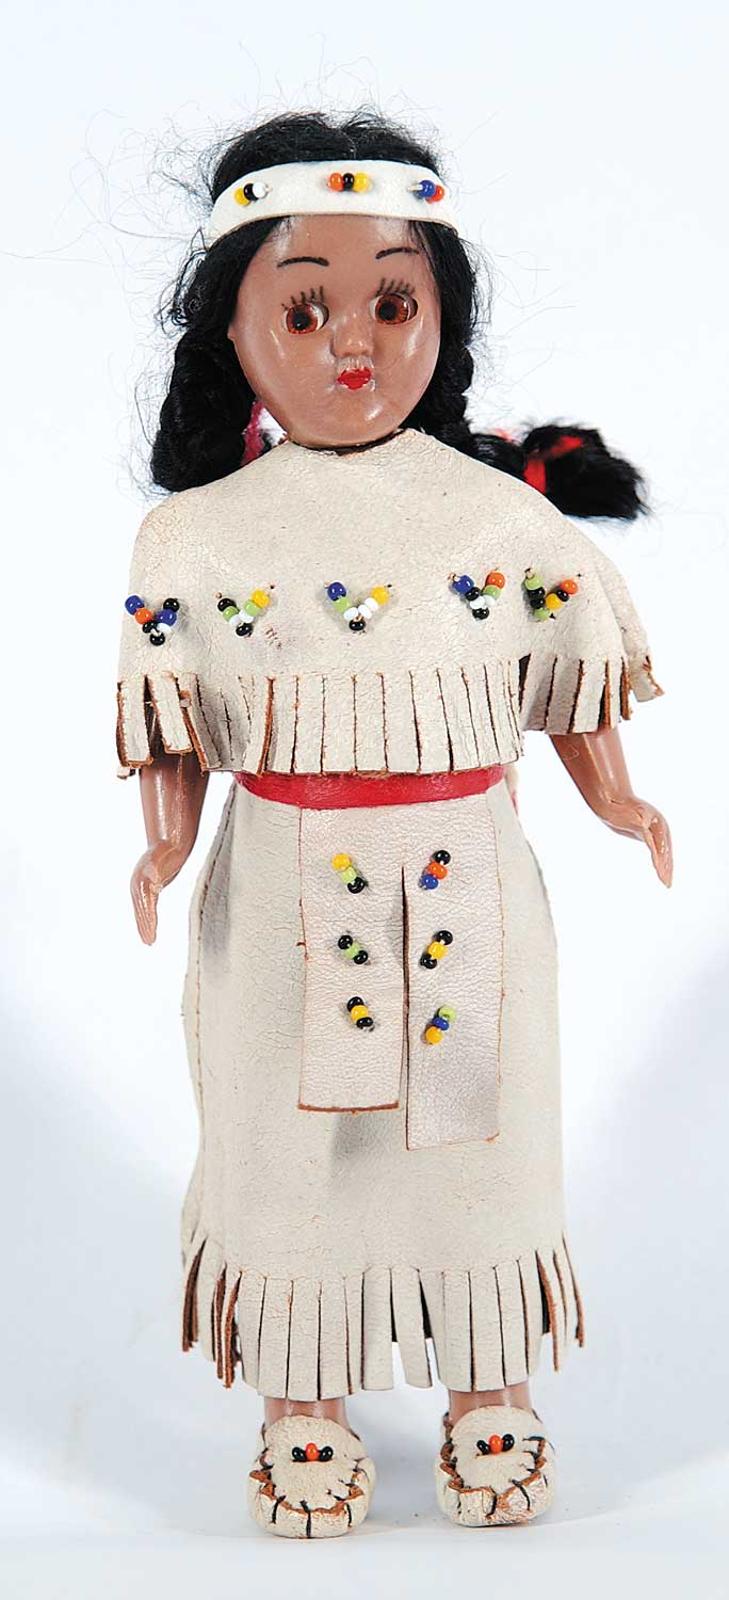 First Nations Basket School - Plastic Native Girl Doll